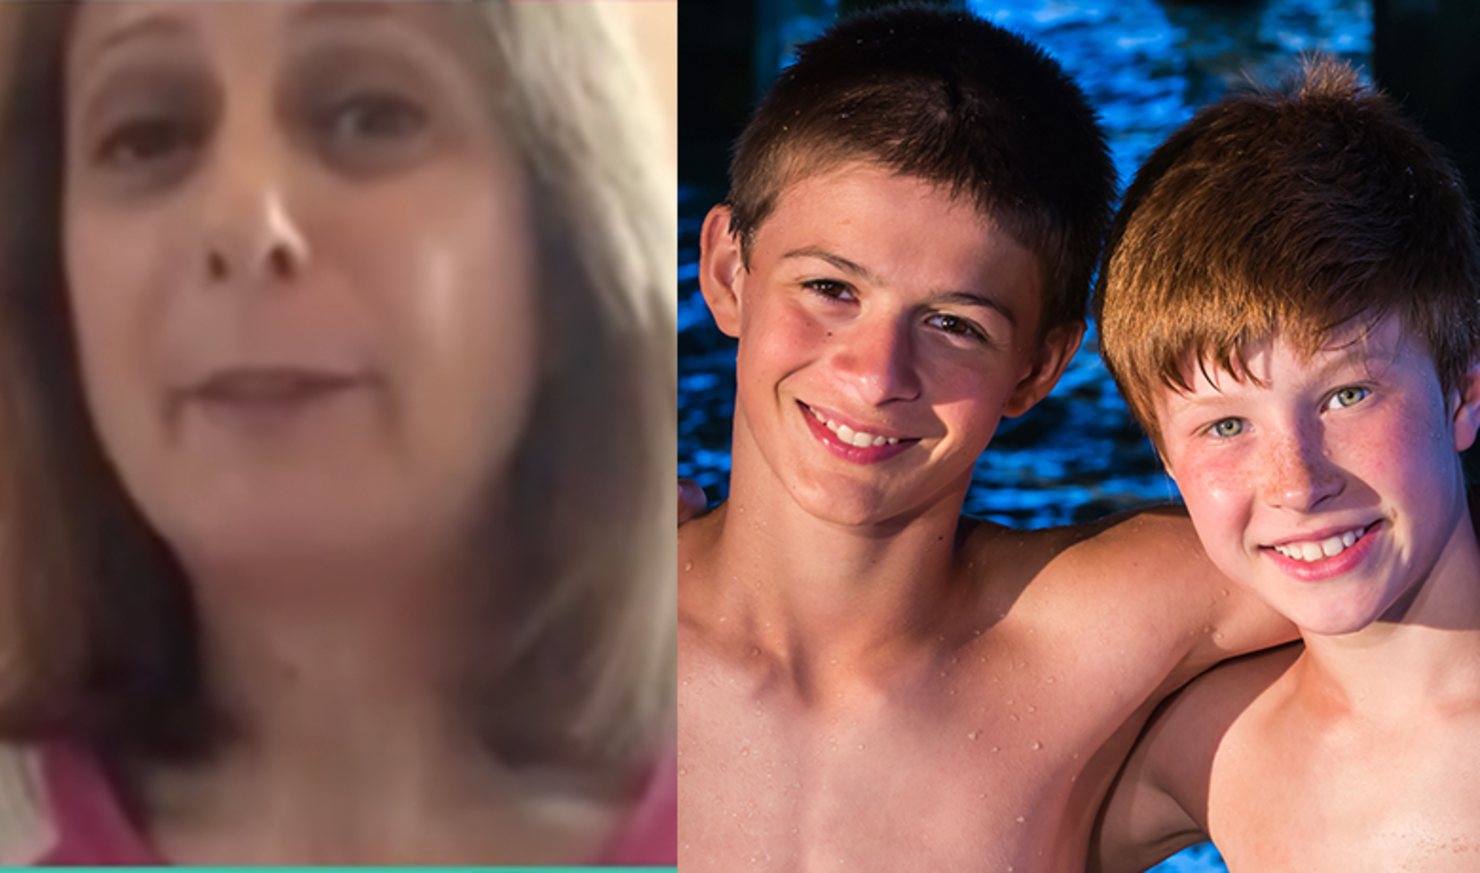 Mom Faces Backlash For Bathing With Pre-Teen Sons.